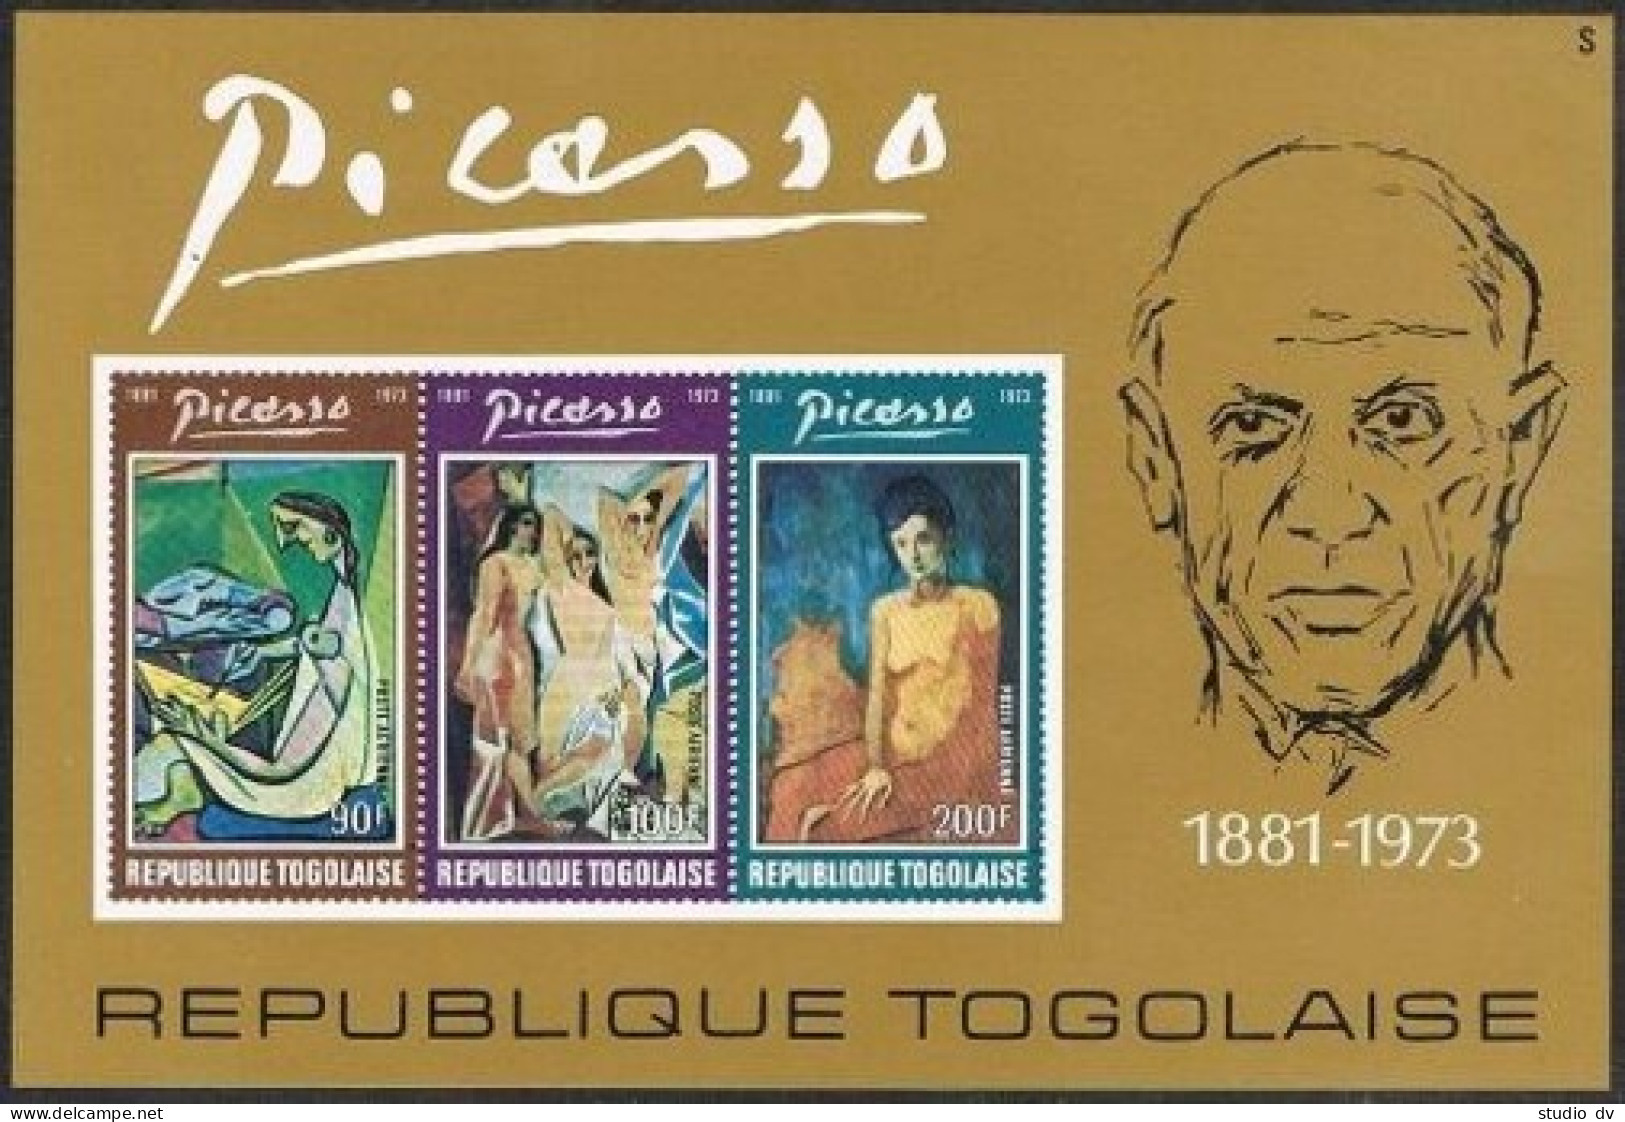 Togo C219a Sheet, MNH. Michel Bl.82. Picasso Paintings 1974. - Togo (1960-...)